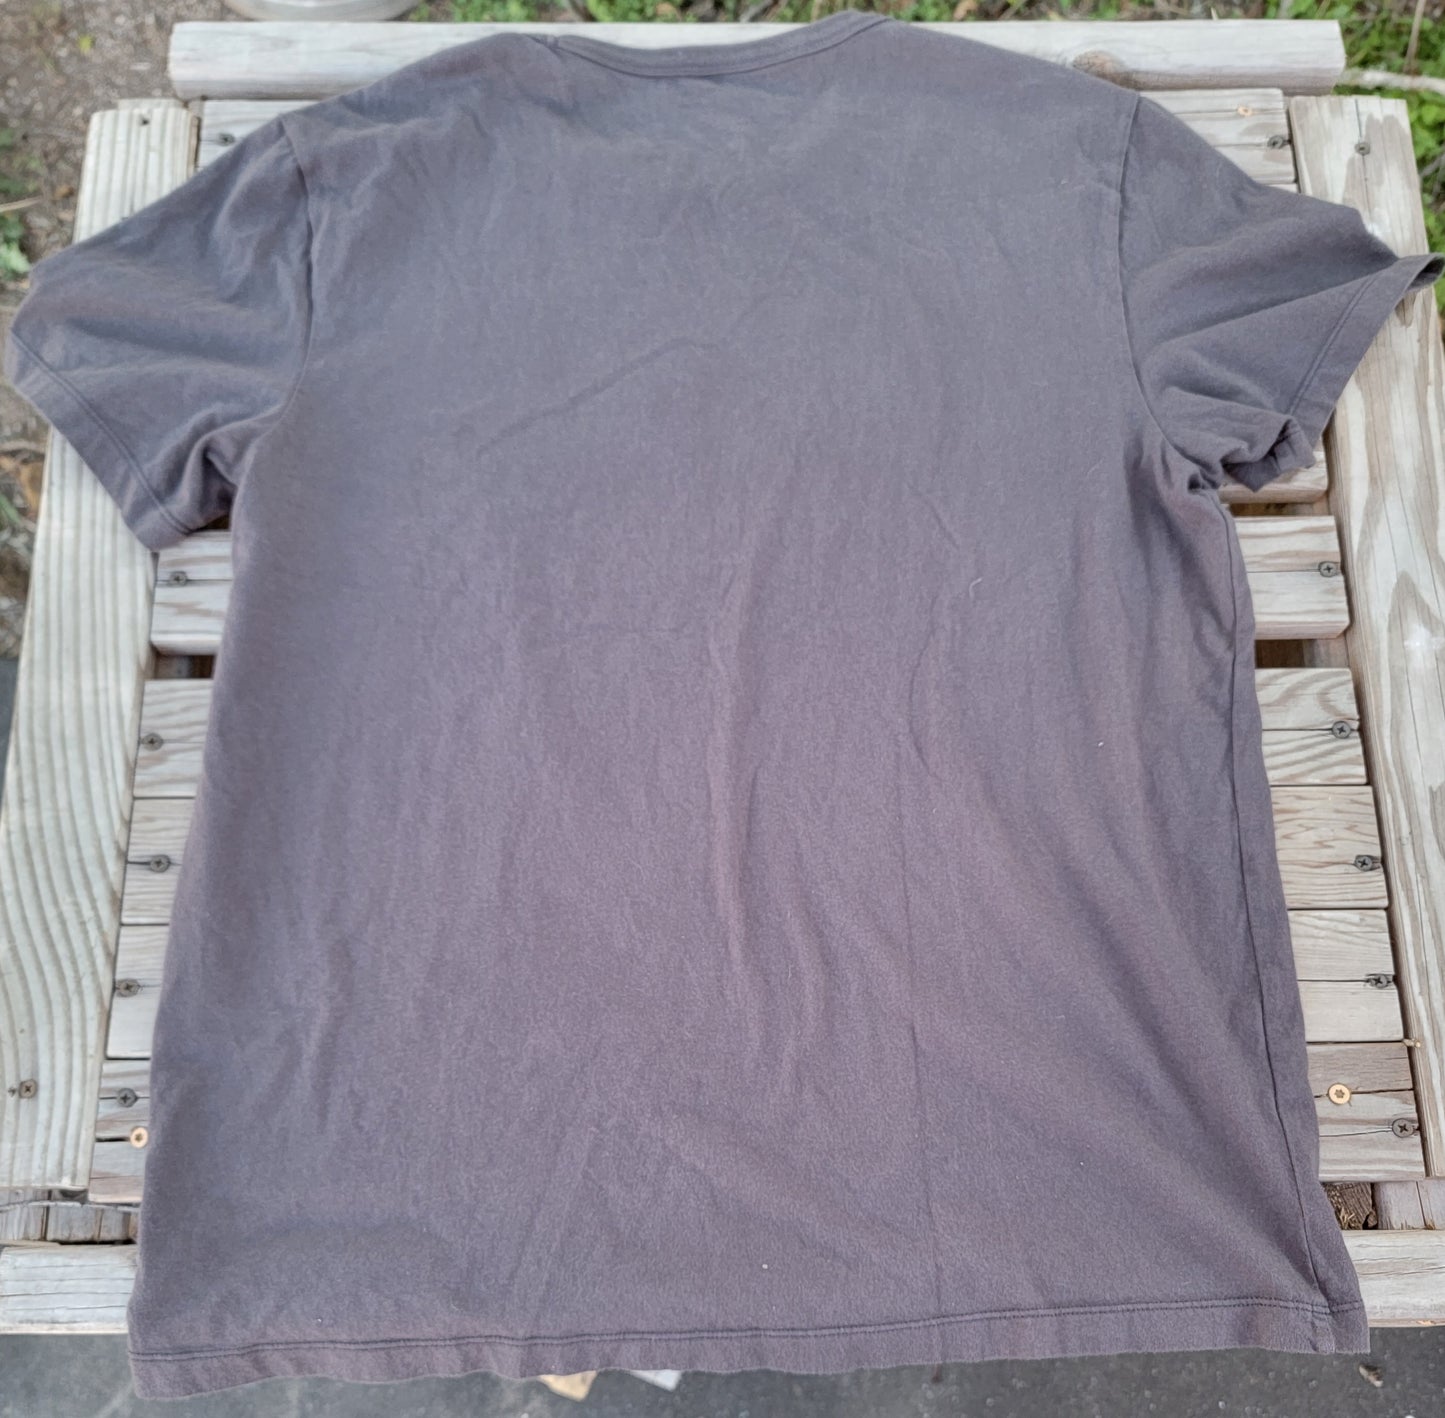 American Eagle large t-shirt 
brand new grey and white eagle shirt with the words elevated nomadic goods. t-shirt is on new condition.